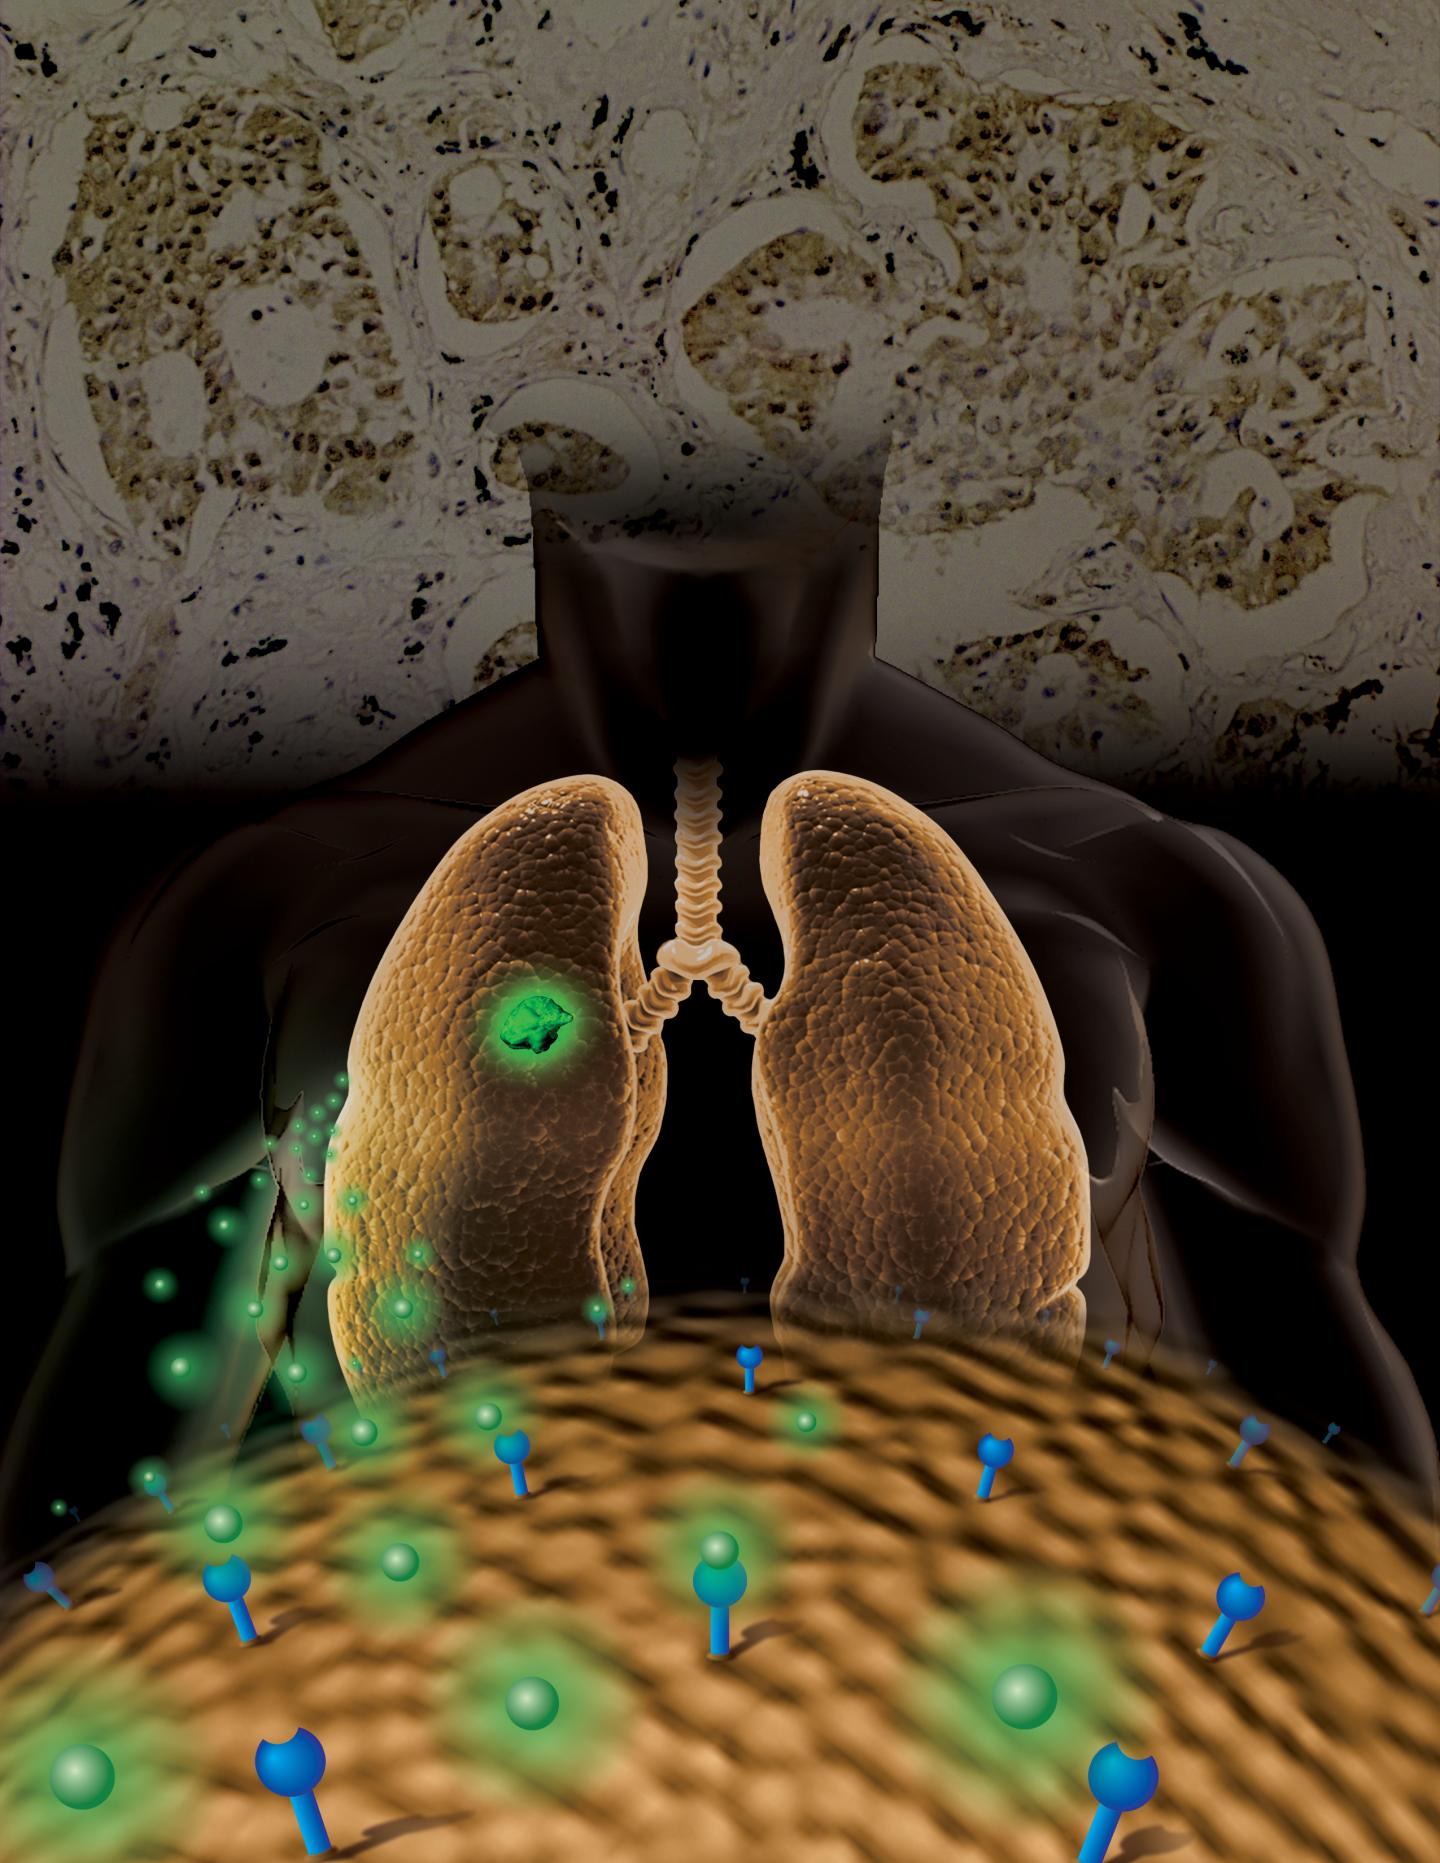 Novel Molecular Imaging Strategy for Determining Molecular Classifications of NSCLC